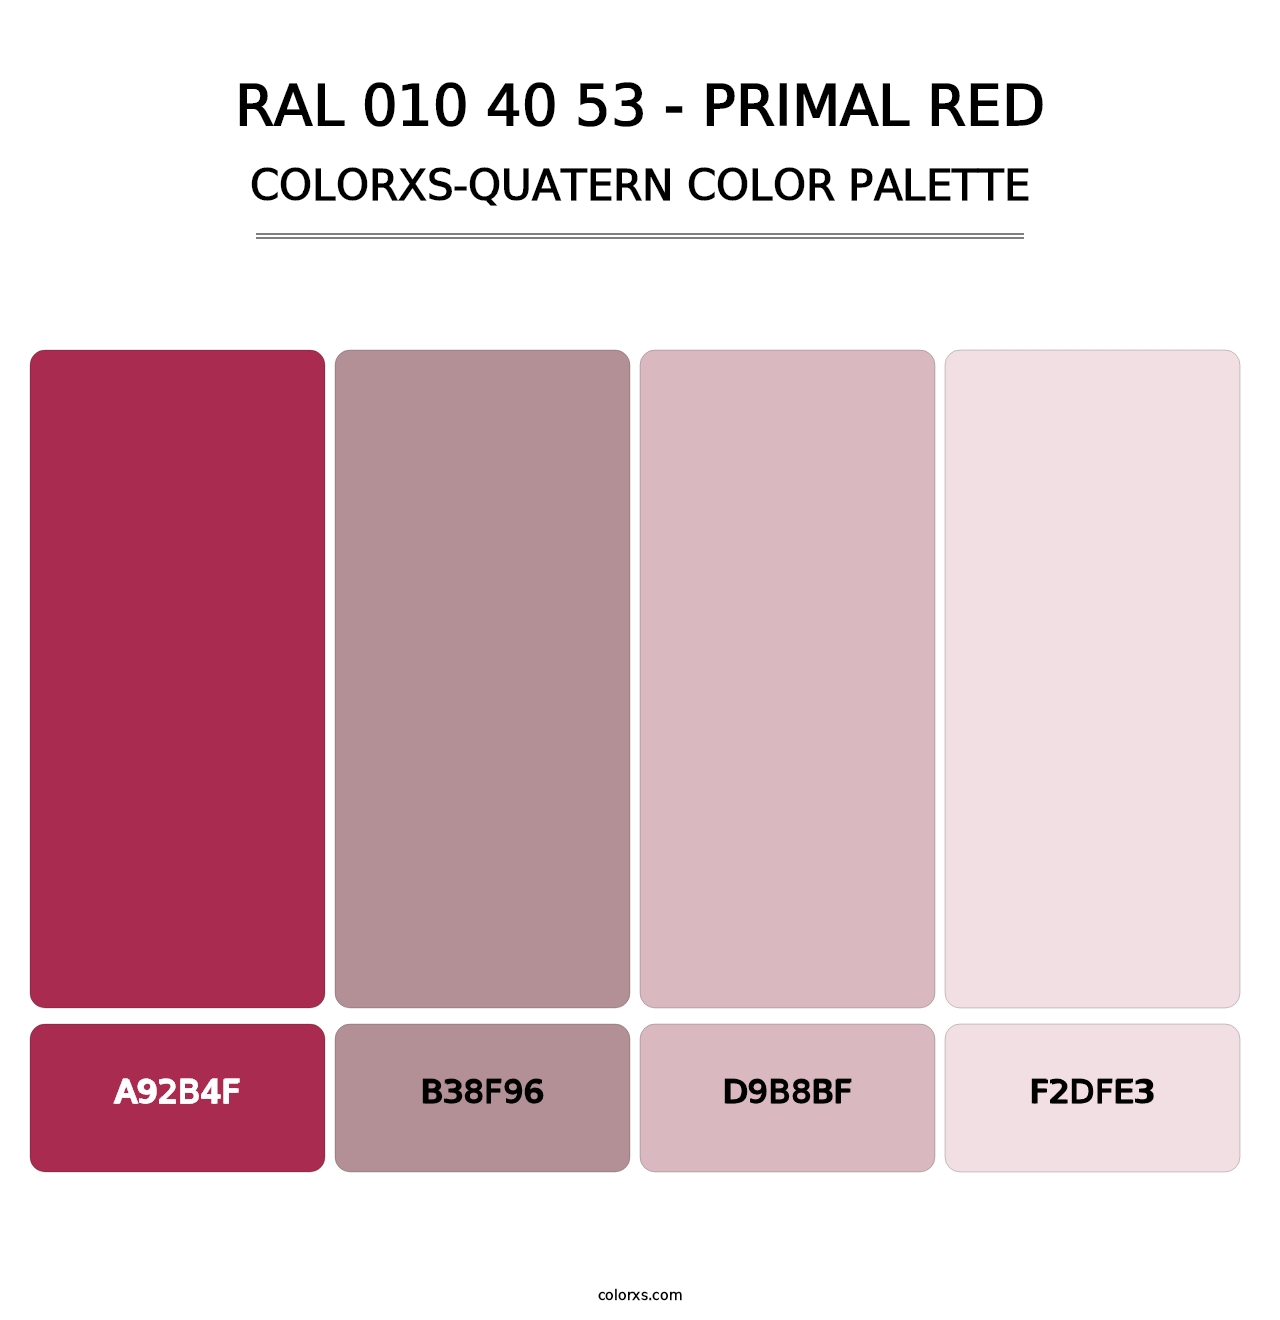 RAL 010 40 53 - Primal Red - Colorxs Quatern Palette